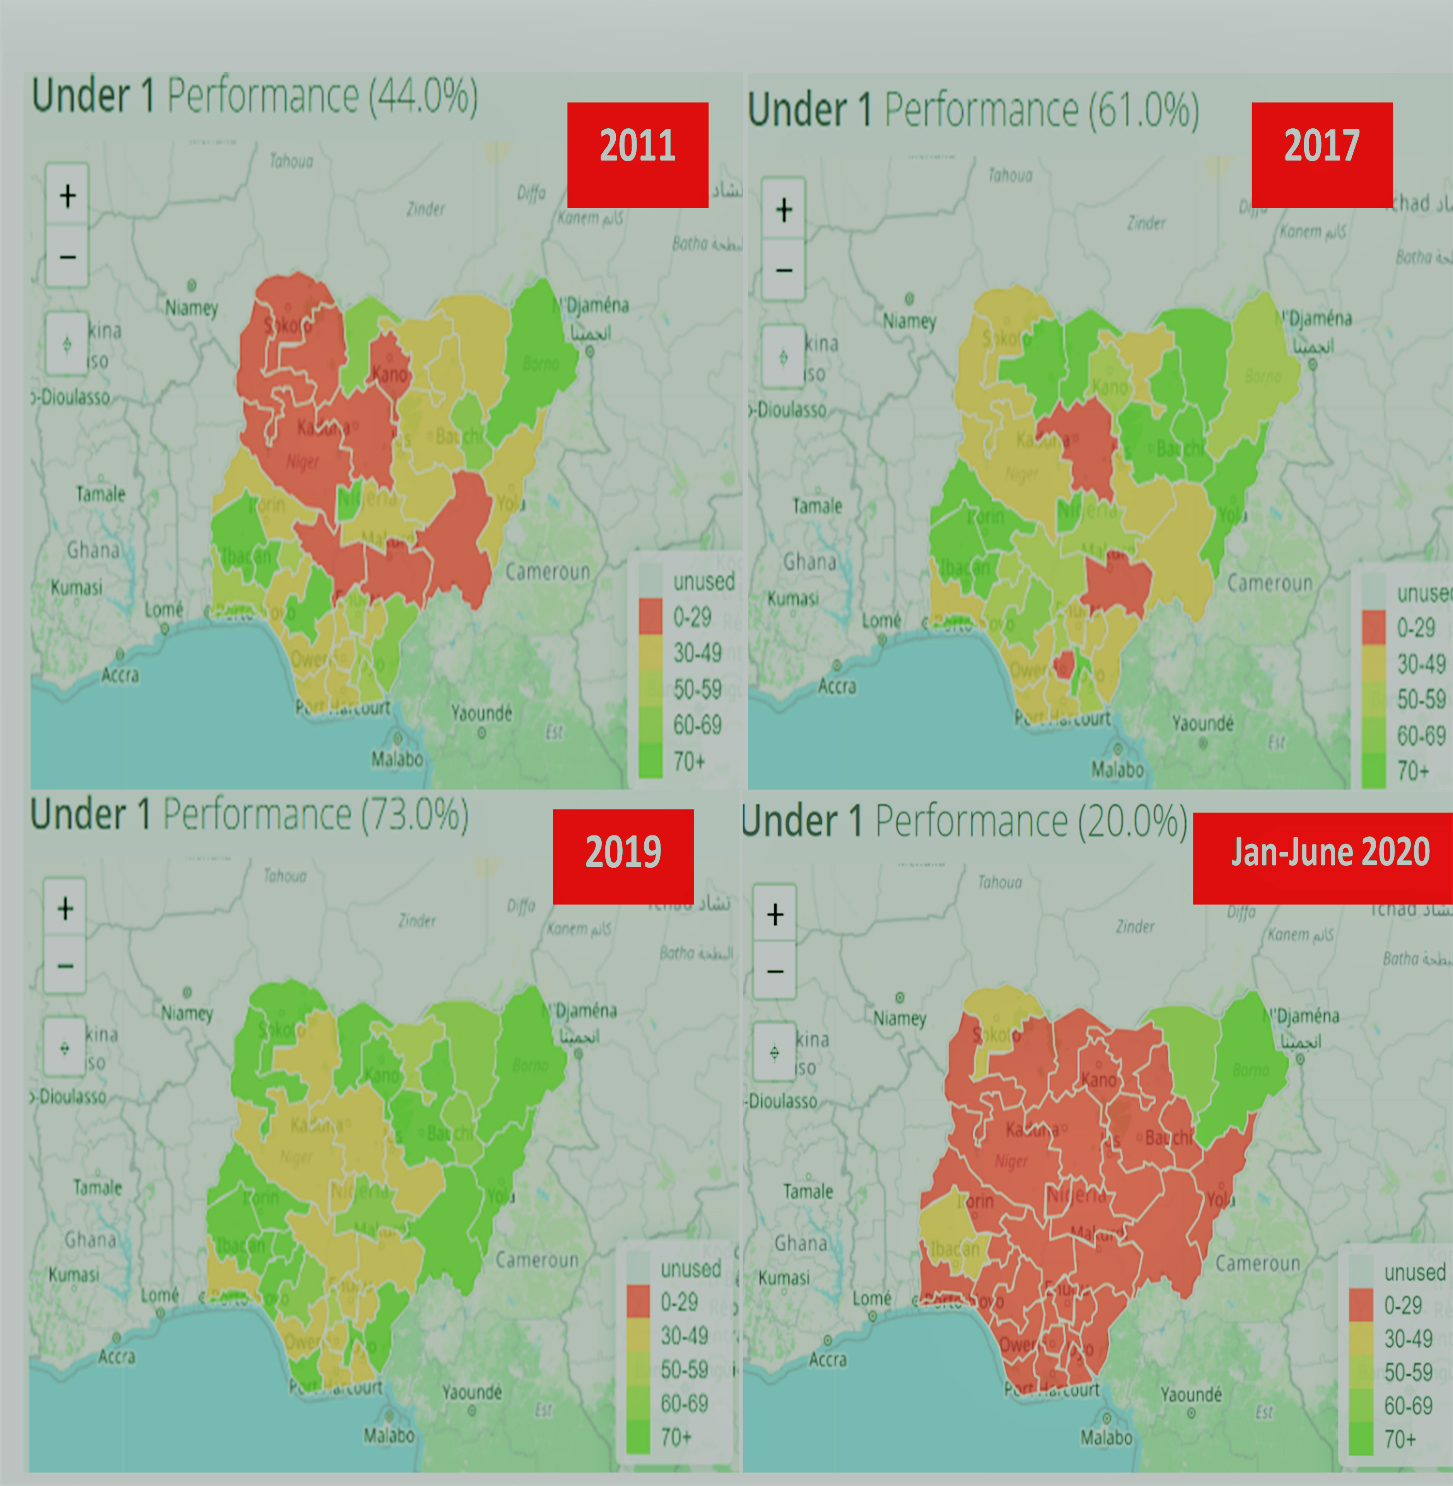 States’ performance between 2011 and 2020. Source: https://rapidsmsnigeria.org/br/.